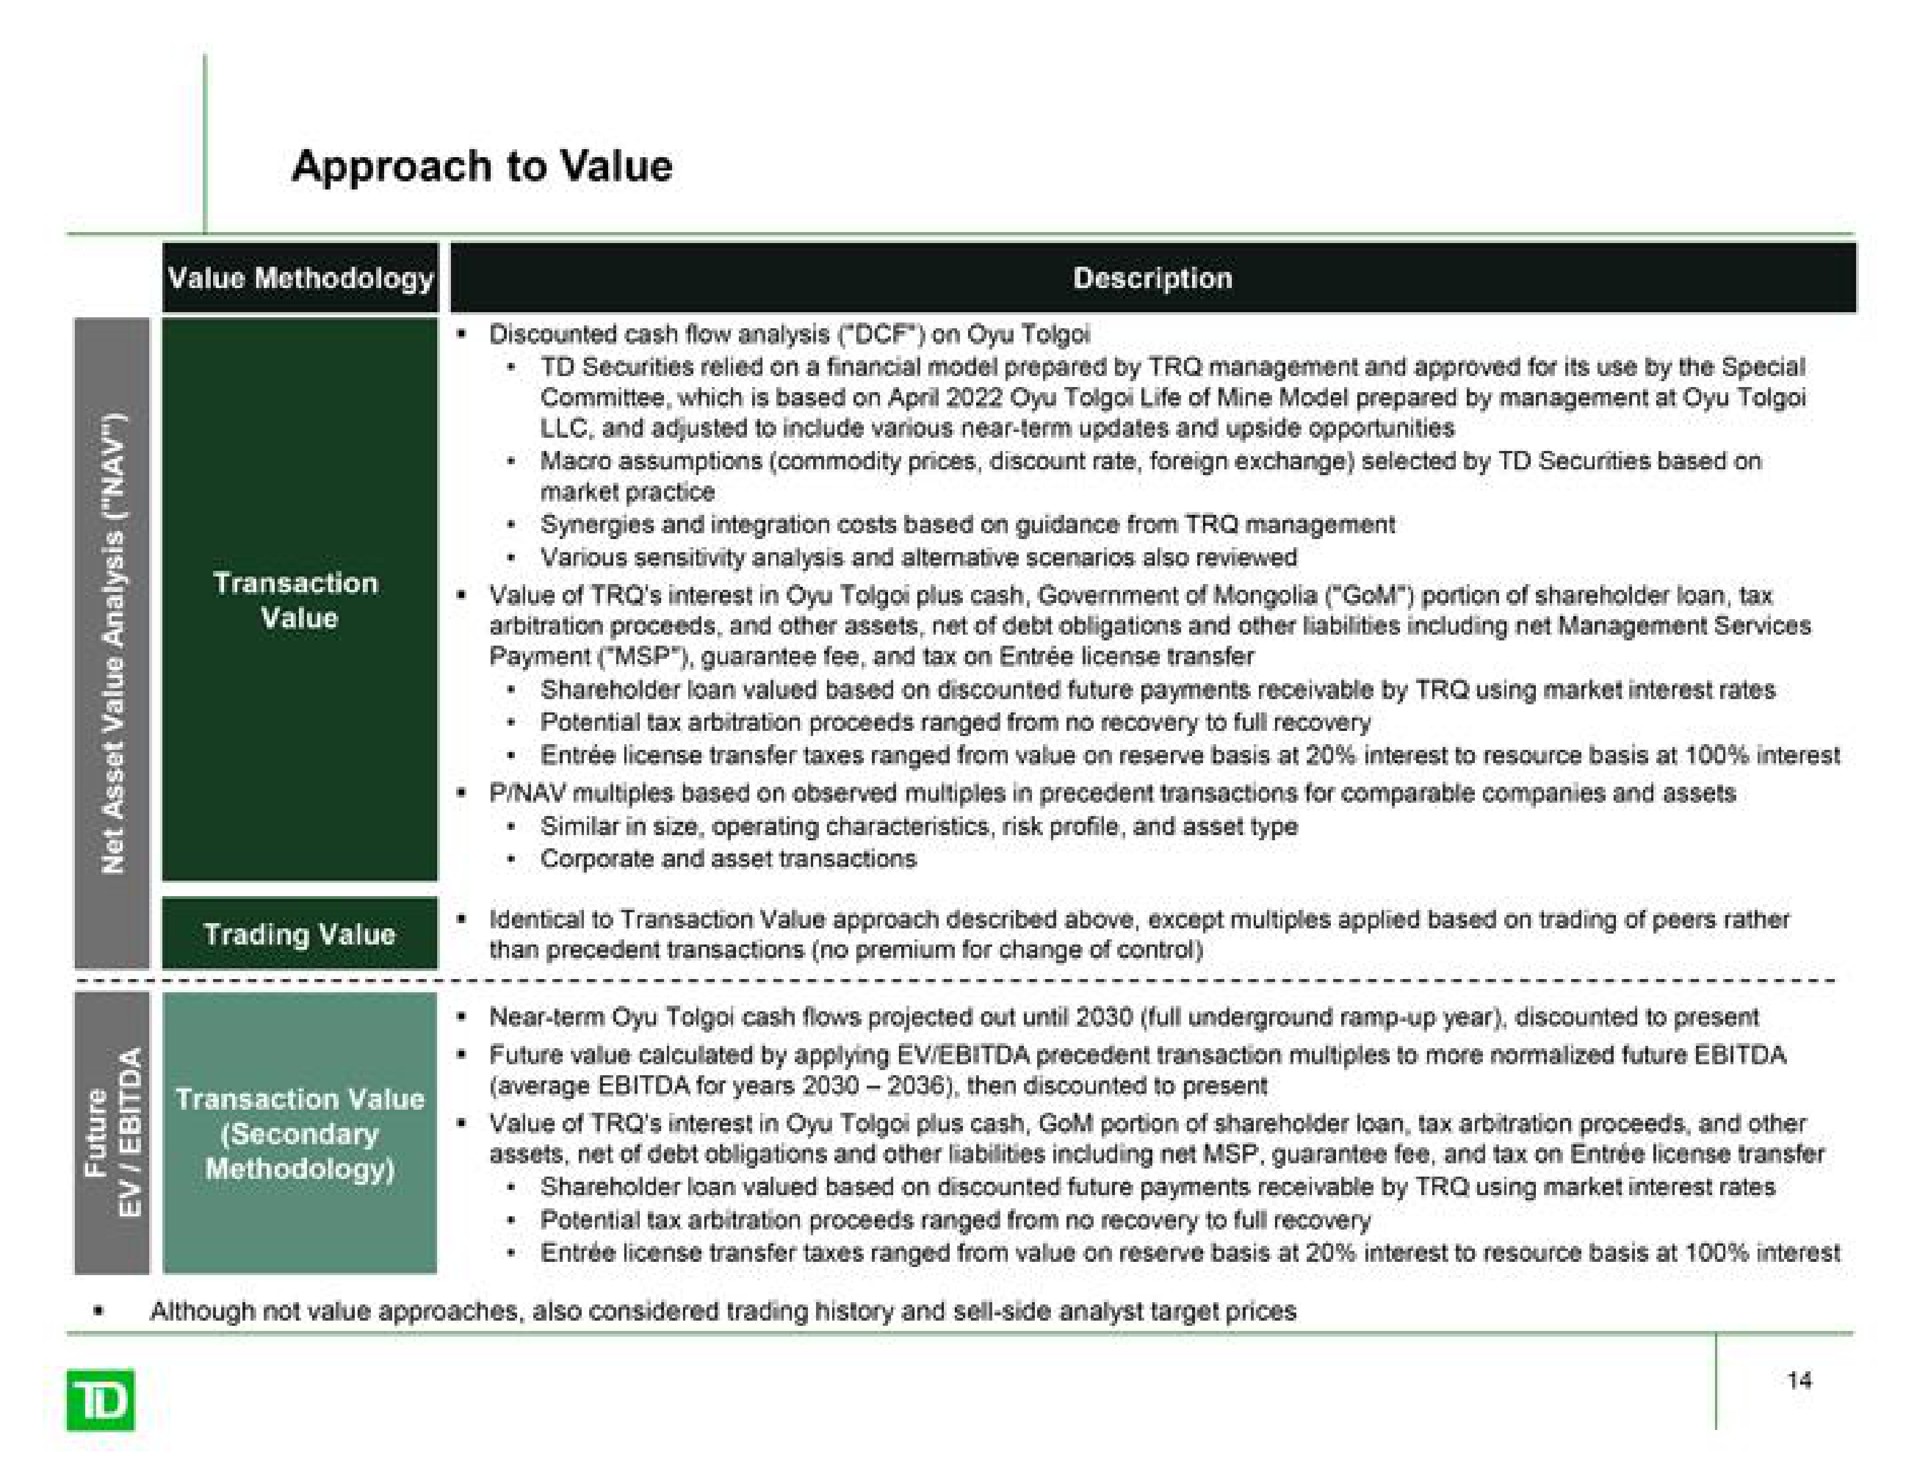 approach to value secondary value of interest in plus cash portion of shareholder loan tax arbitration proceeds and other i | TD Securities